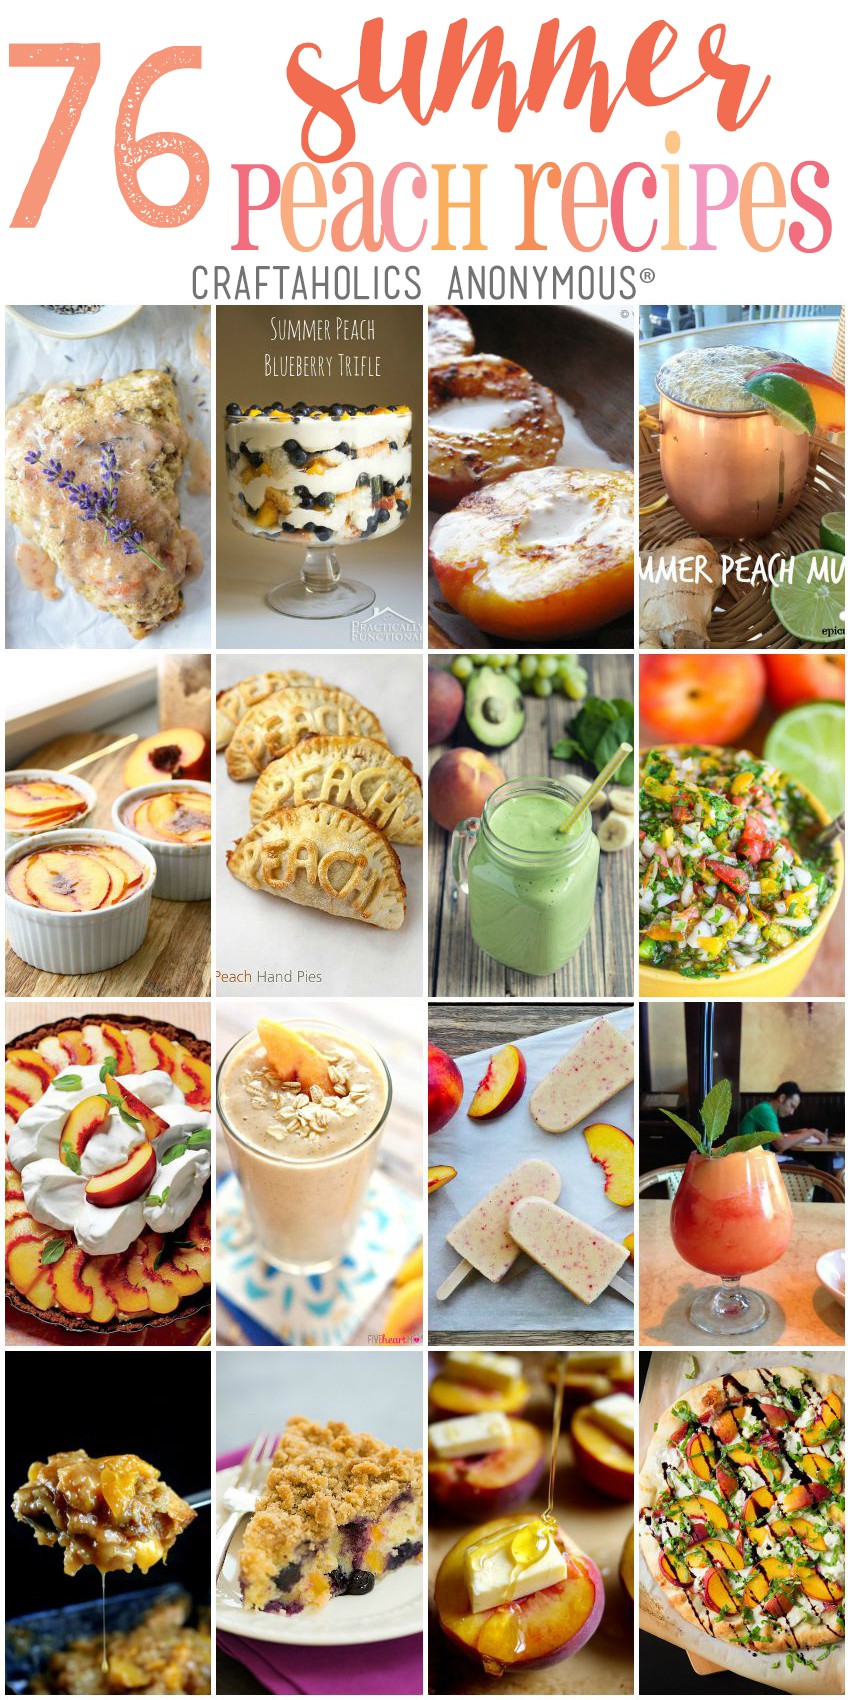 76 Summer Peach Recipes at Craftaholics Anonymous